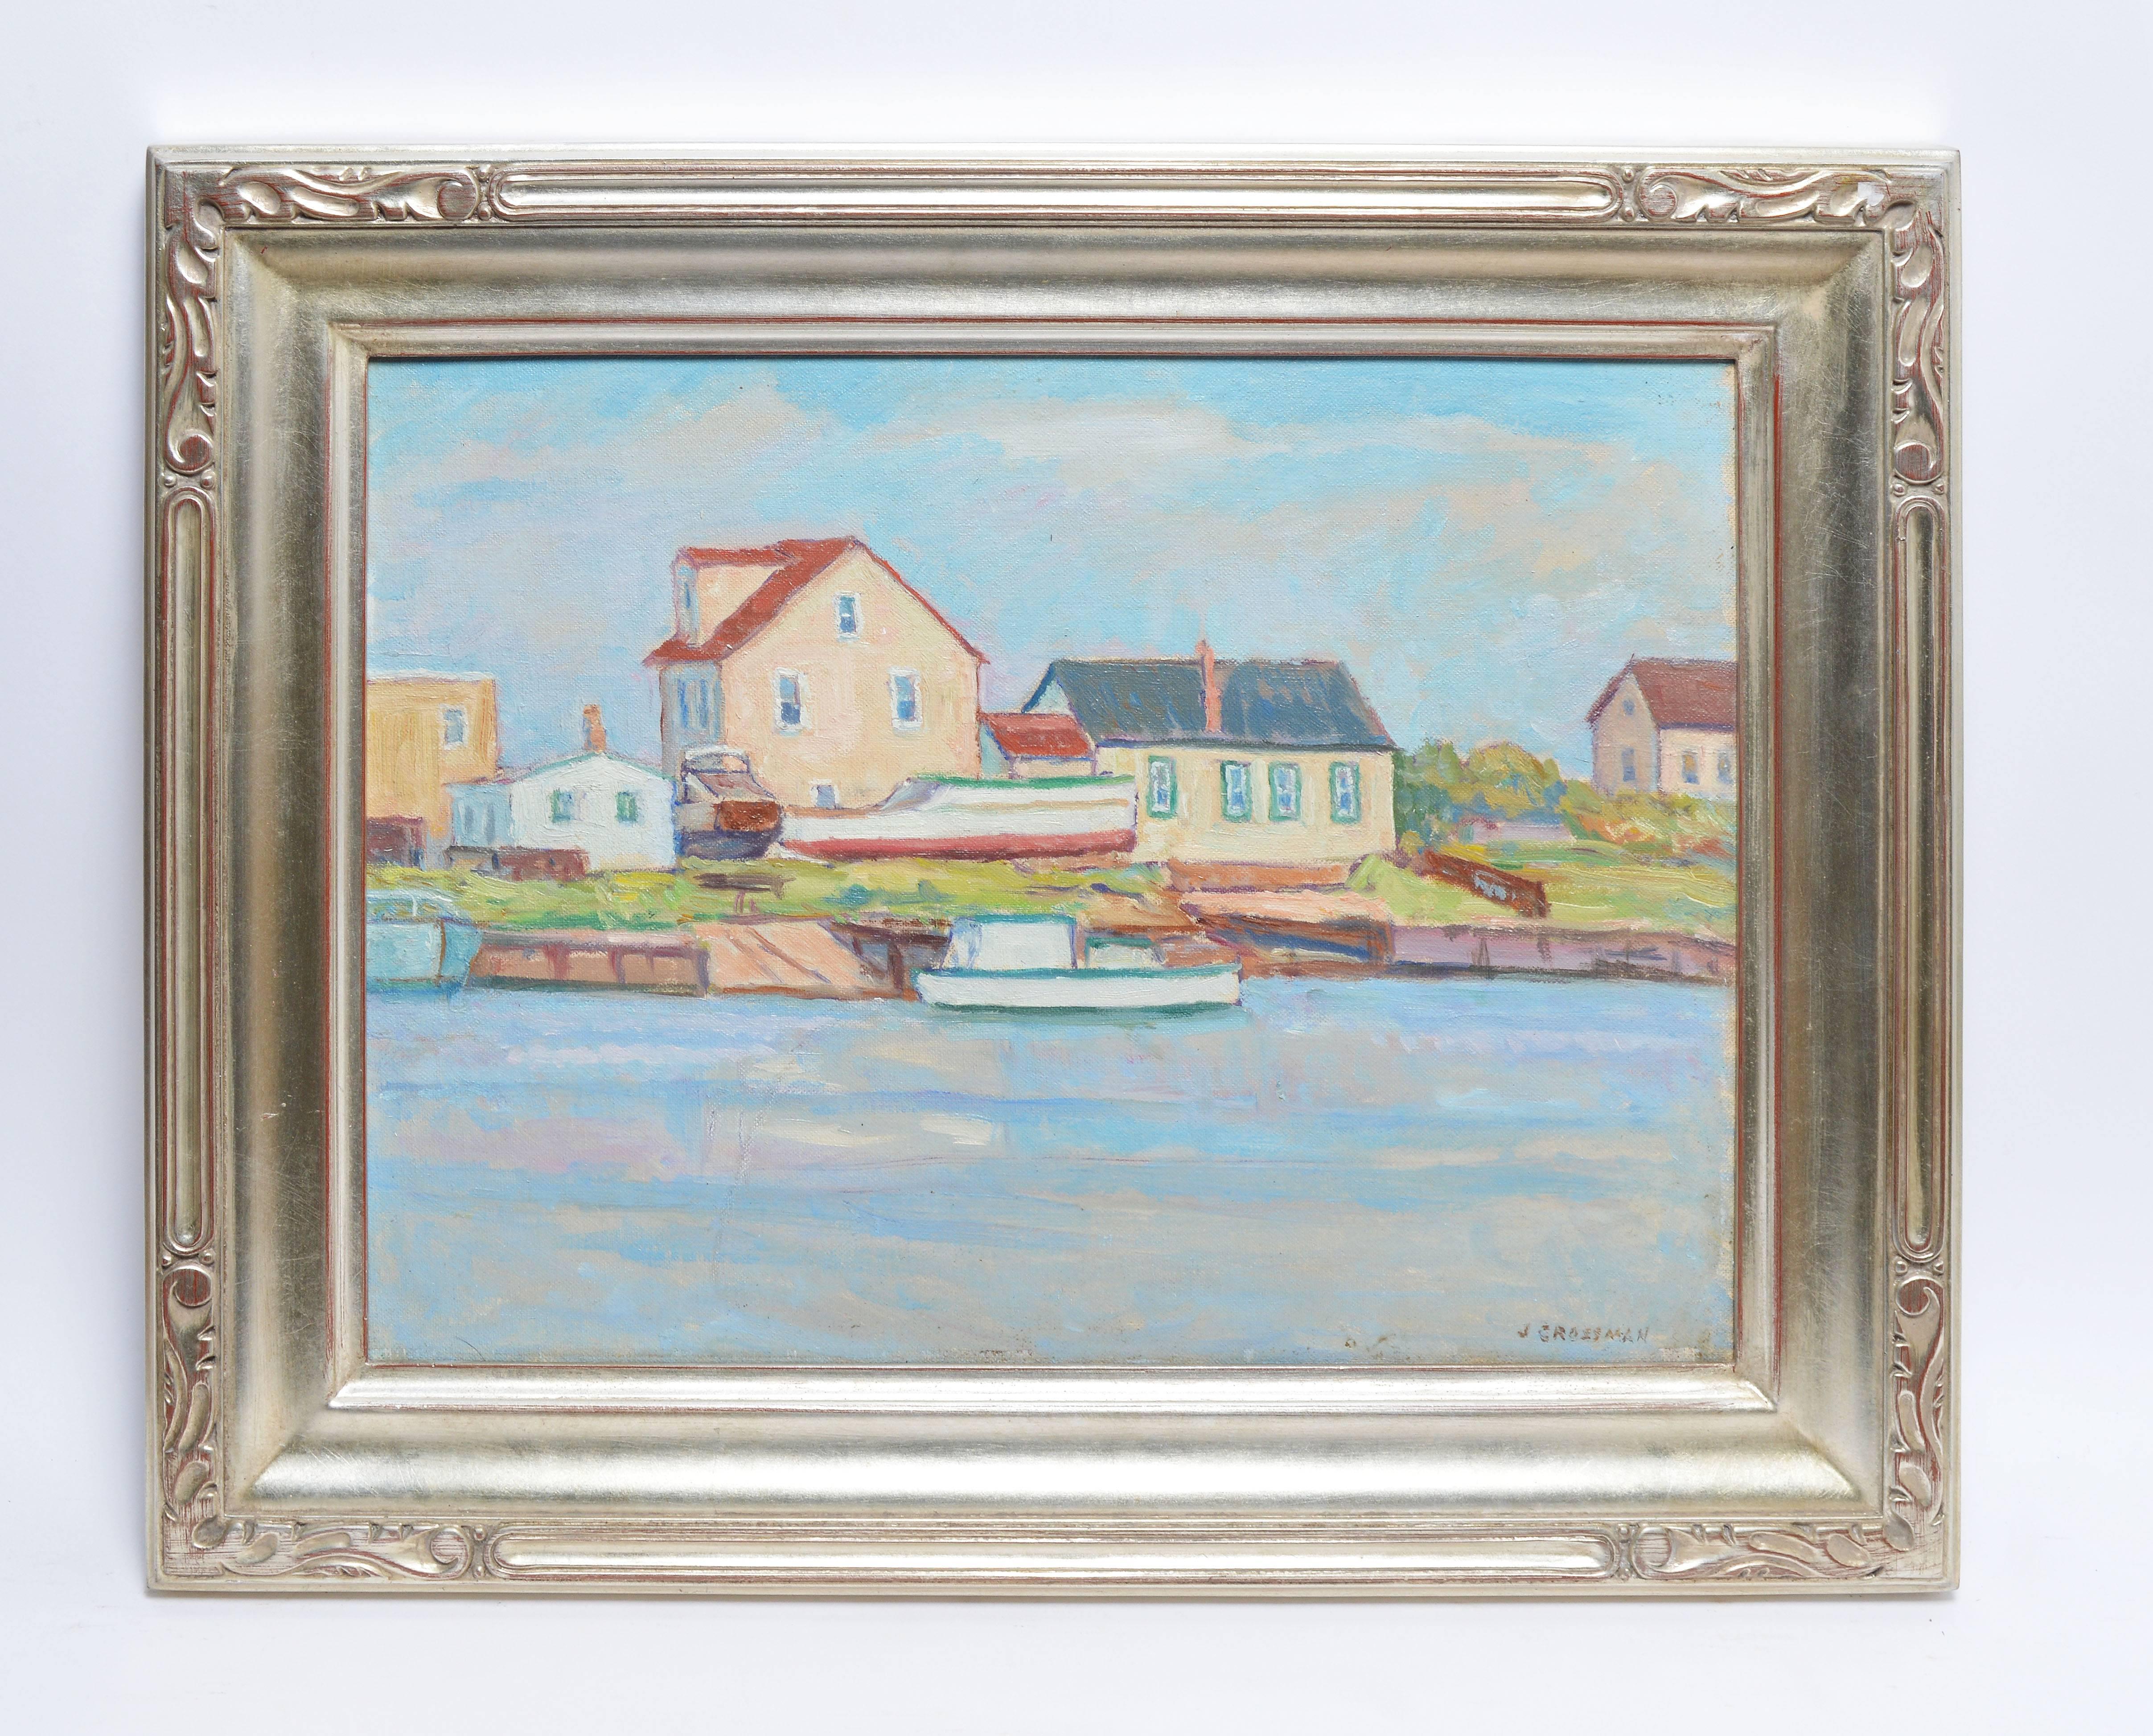 Impressionist harbor view with boats by Joseph Grossman  (born 1889).  Oil on board, circa 1930.  Signed lower right, 